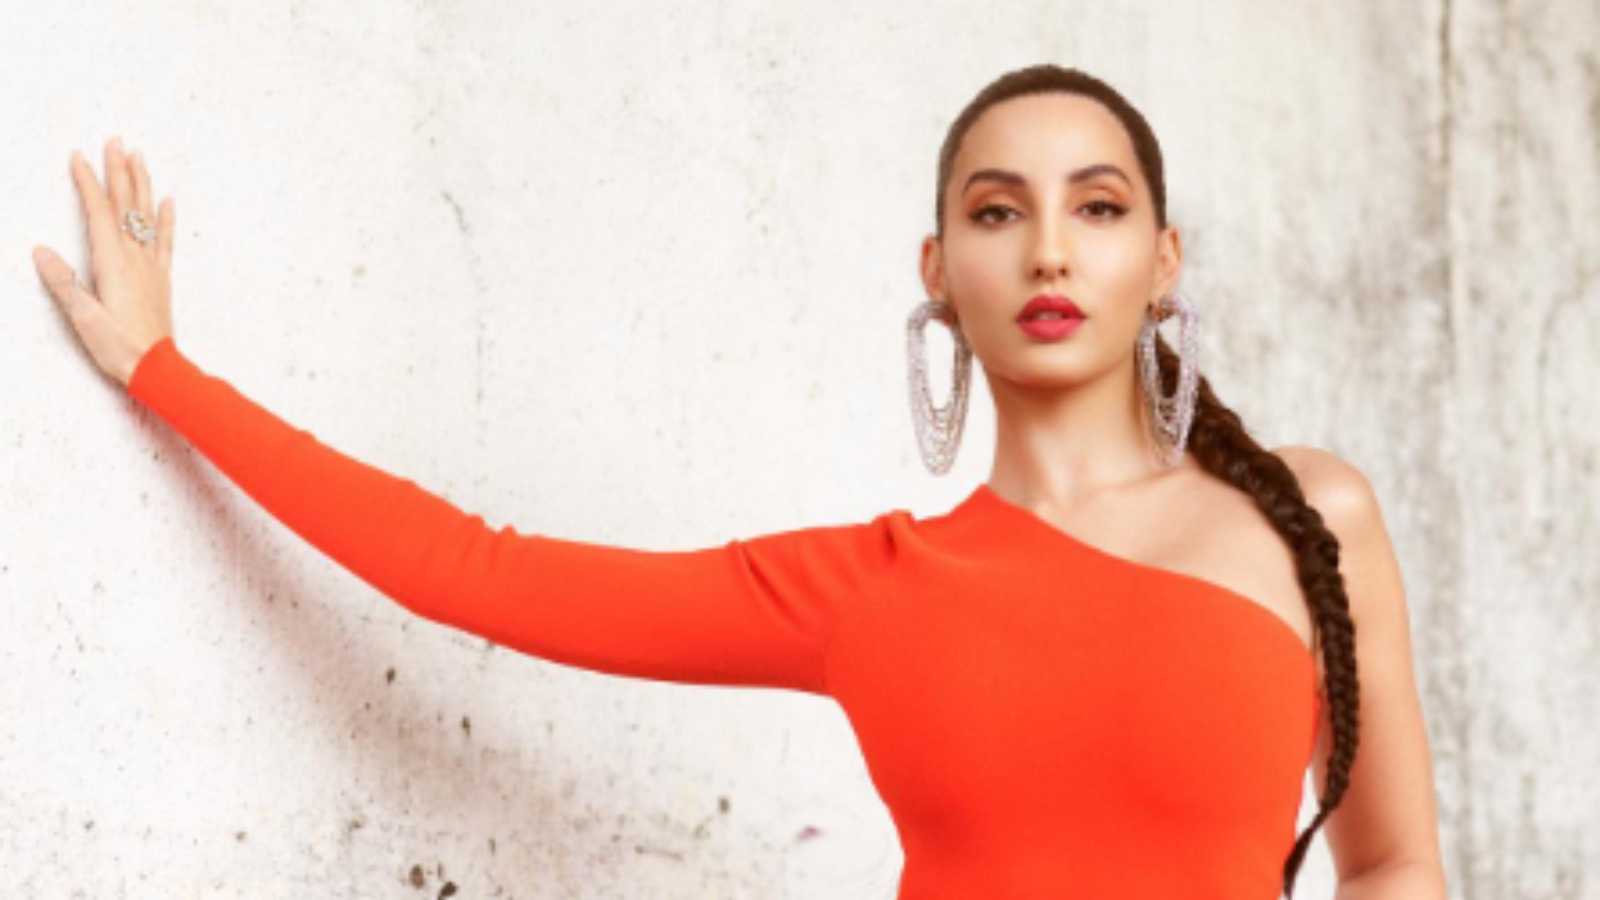 Nora Fatehi on her Bollywood struggles: ‘I developed thicker skin because social media can kill you’